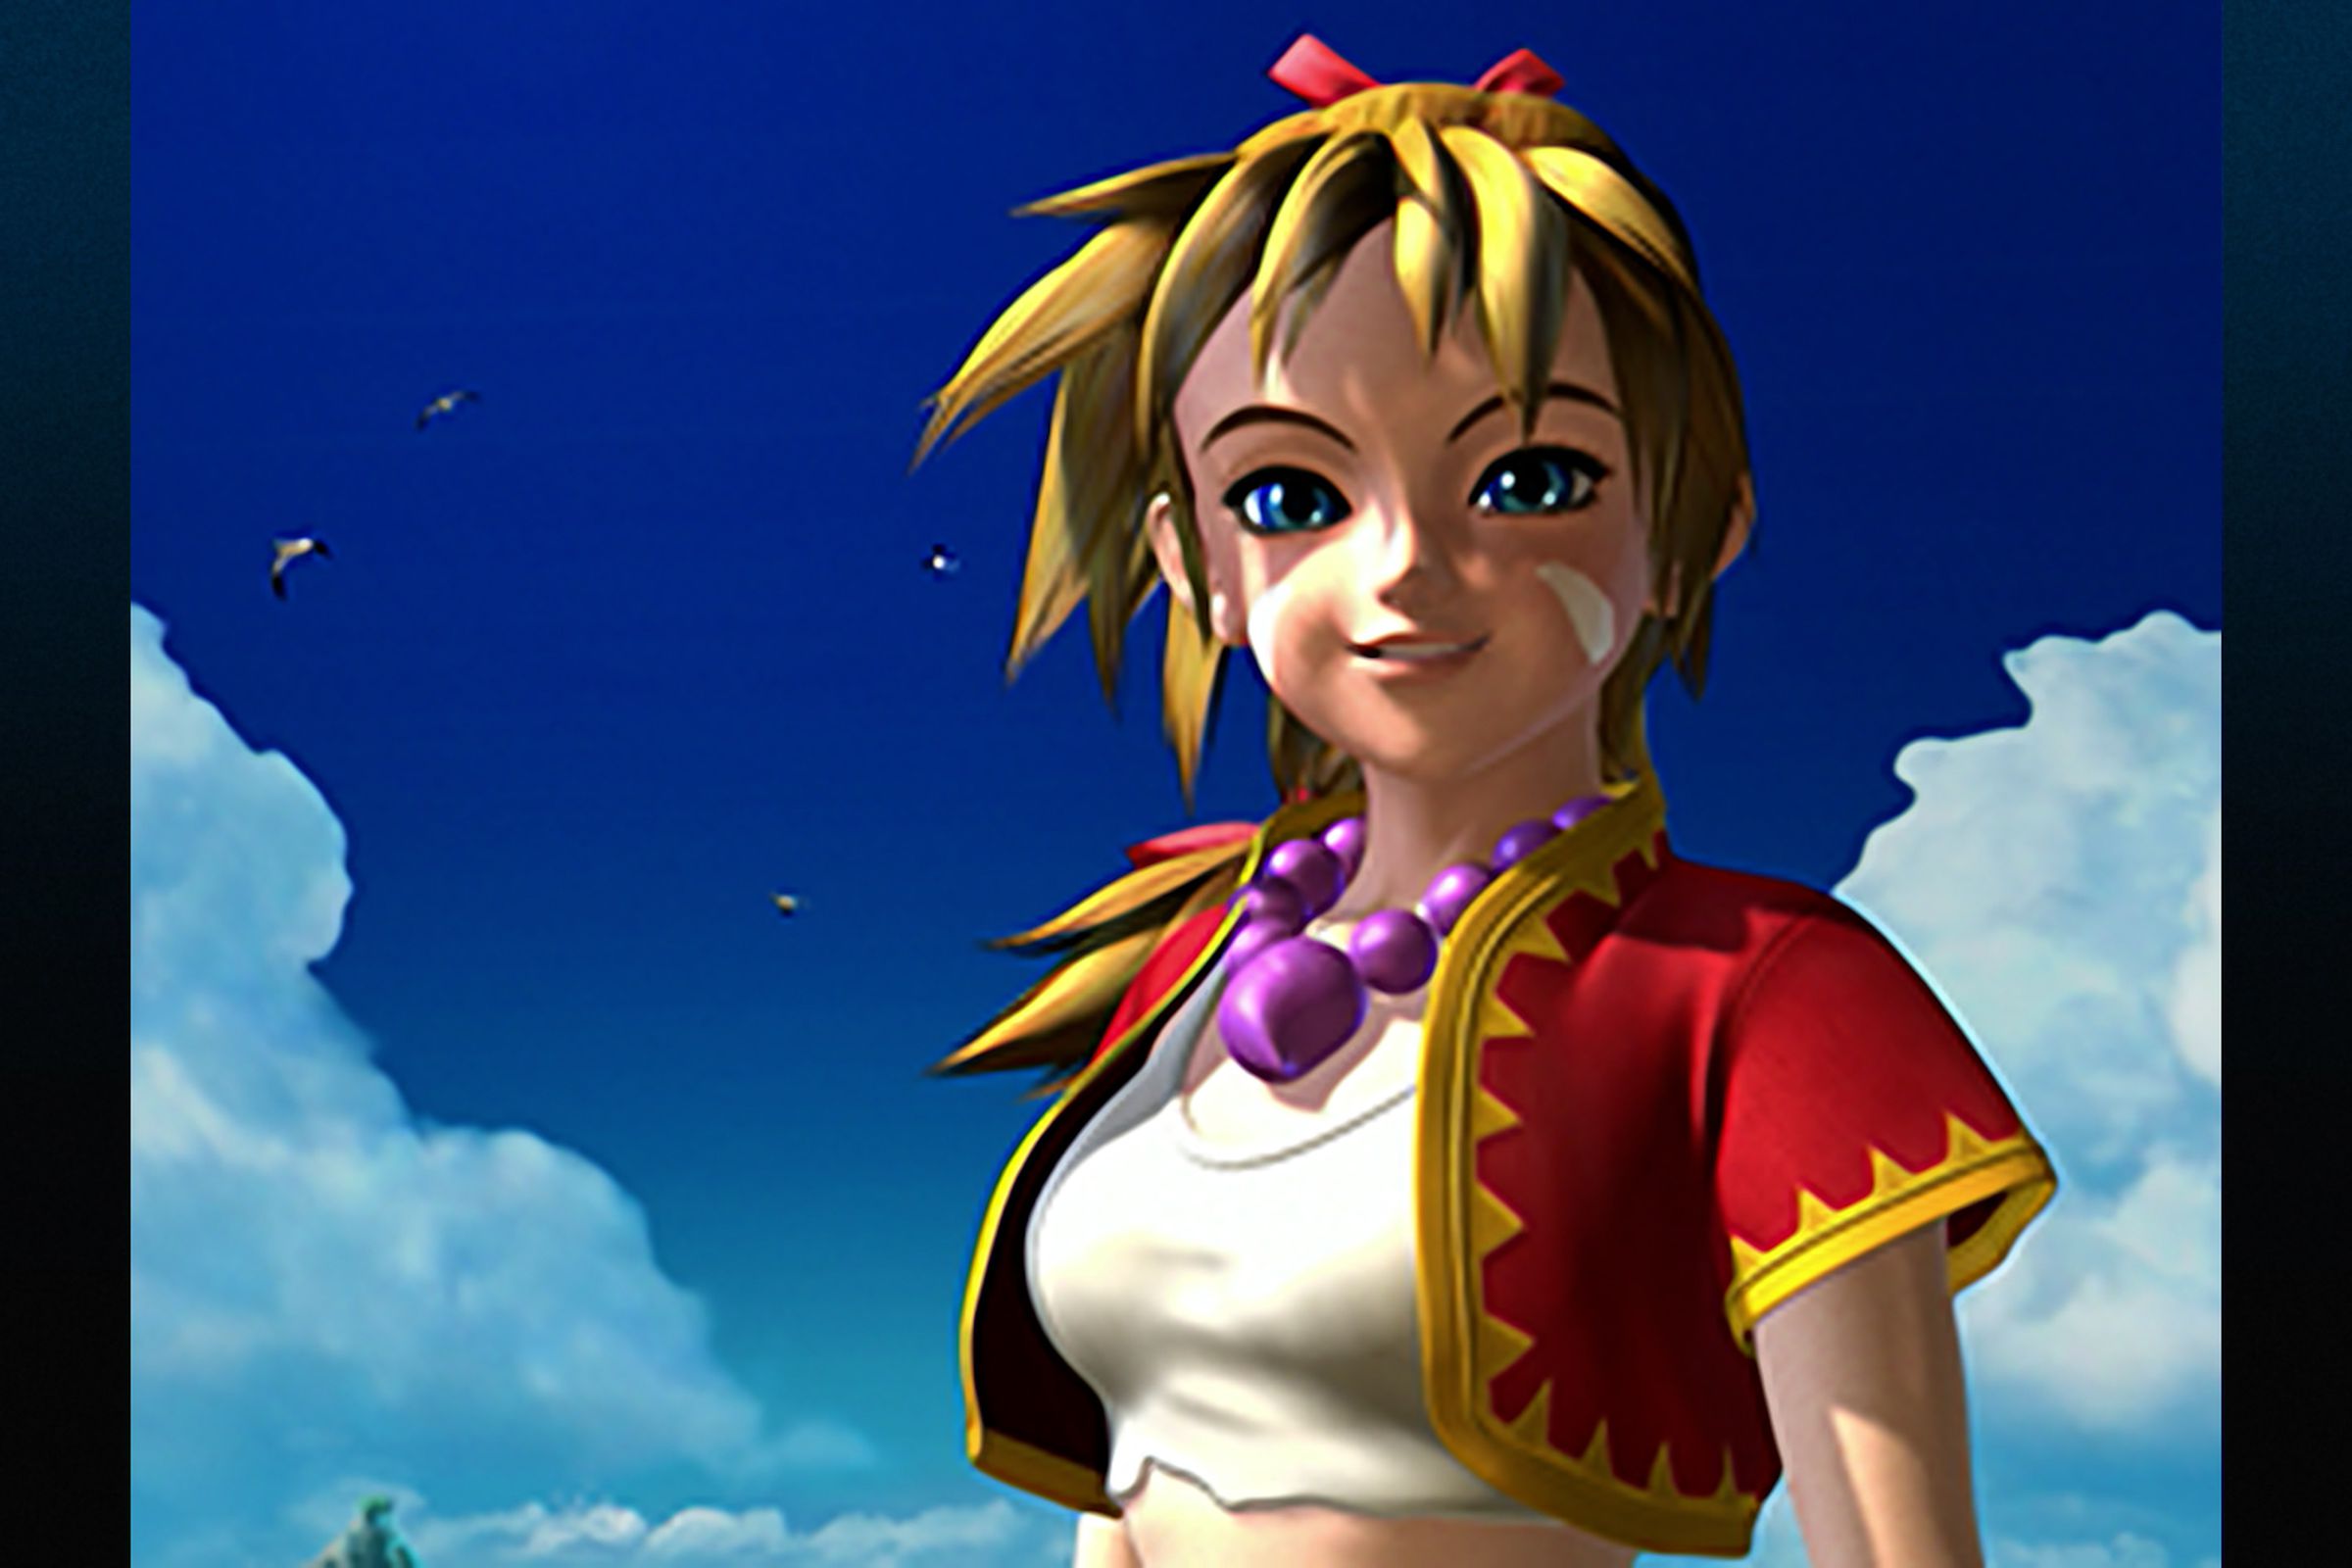 Screenshot from Chrono Cross featuring the main character, Kid, a light-skinned woman with spiky blond hair smiling against the sky